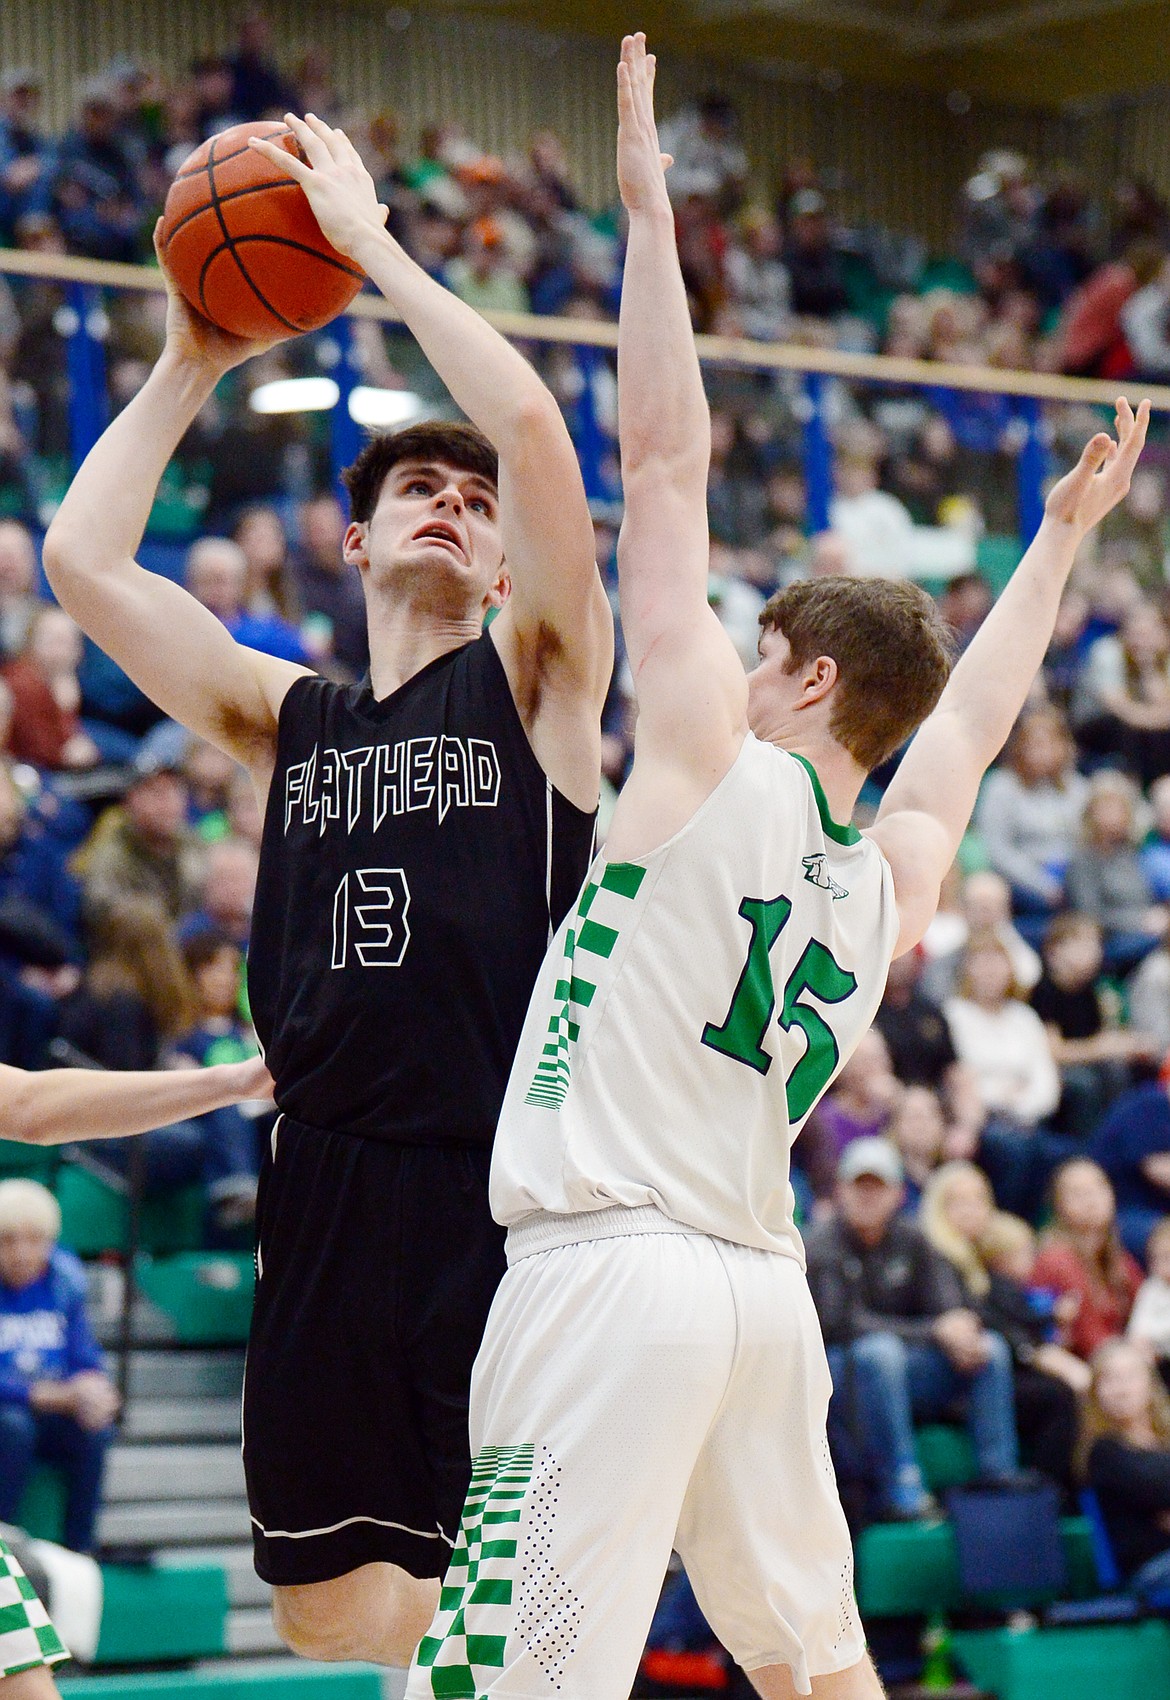 Flathead's Gabe Adams (13) looks to shoot over Glacier's Drew Engellant (15) during a crosstown matchup at Glacier High School on Friday. (Casey Kreider/Daily Inter Lake)